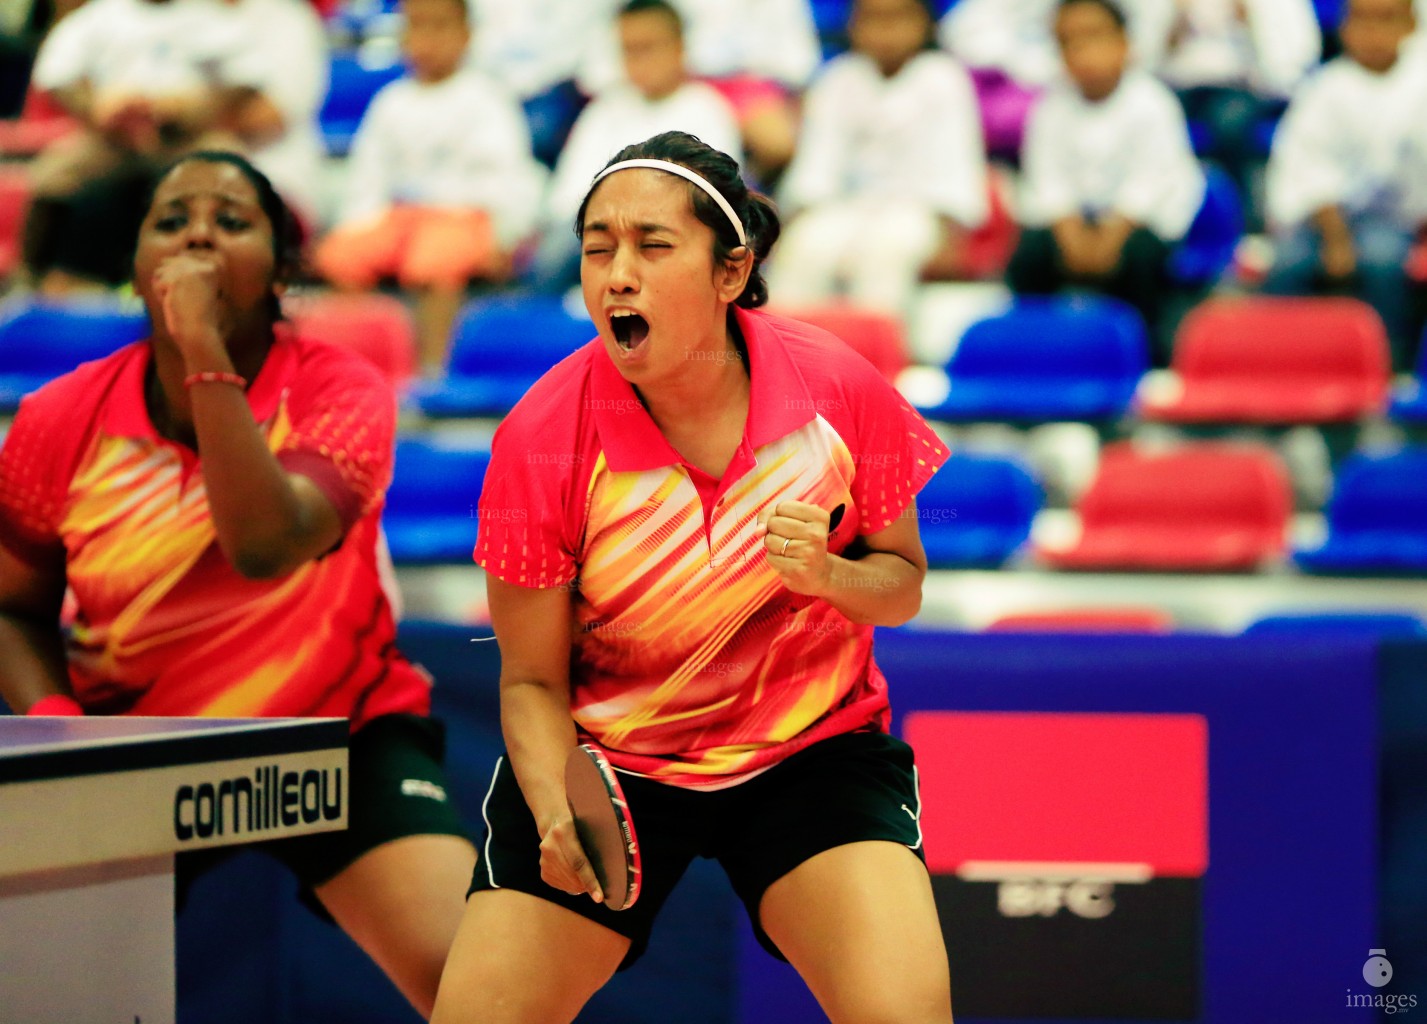 Mueena Mohamed celebrates after winning a point in Womens's doubles event  in Indian Ocean Island Games, La Reunion, Wednesday, August. 5, 2015.  (Images.mv Photo/ Hussain Sinan).